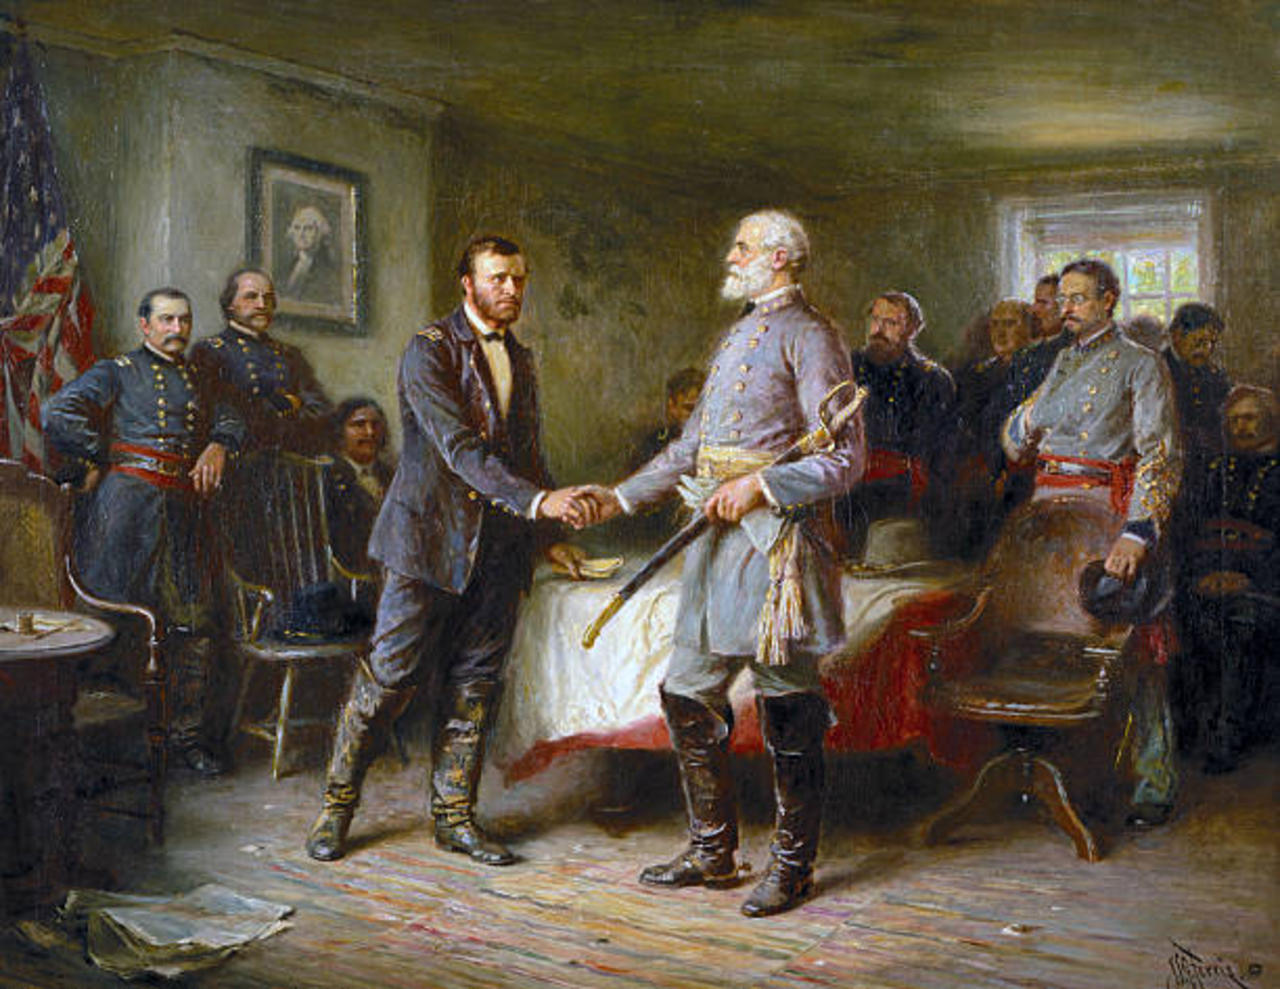 This Day in History: Robert E. Lee Surrenders (April 9th)